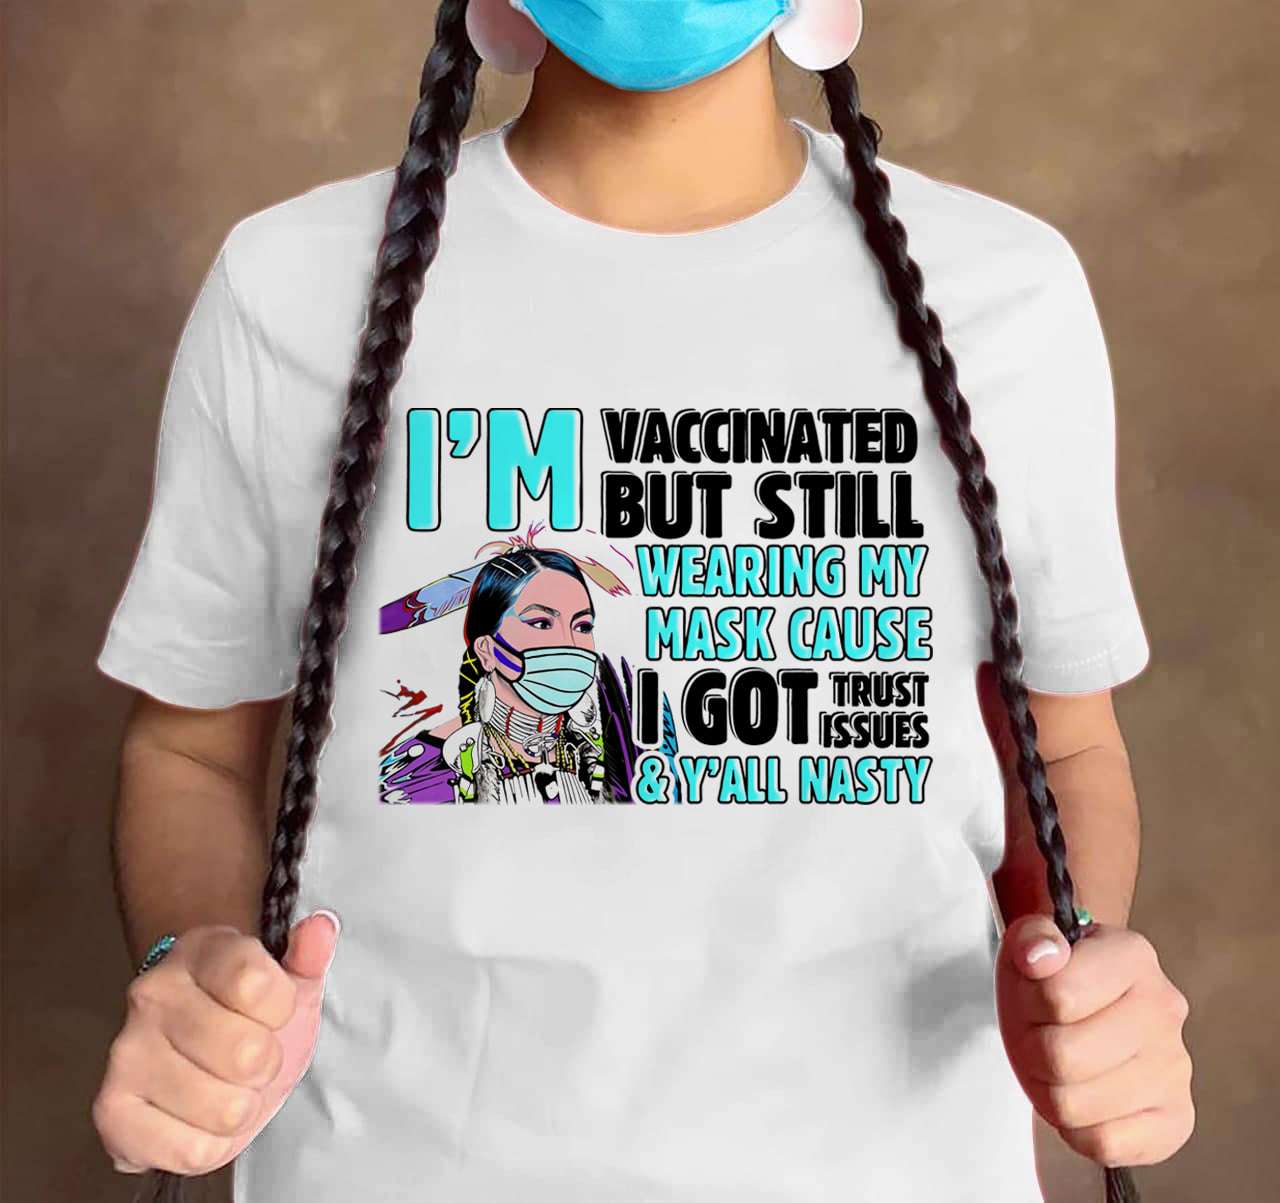 I'm vaccinated but still wearing my mask cause I got trust issues and y'all nasty - Native american women